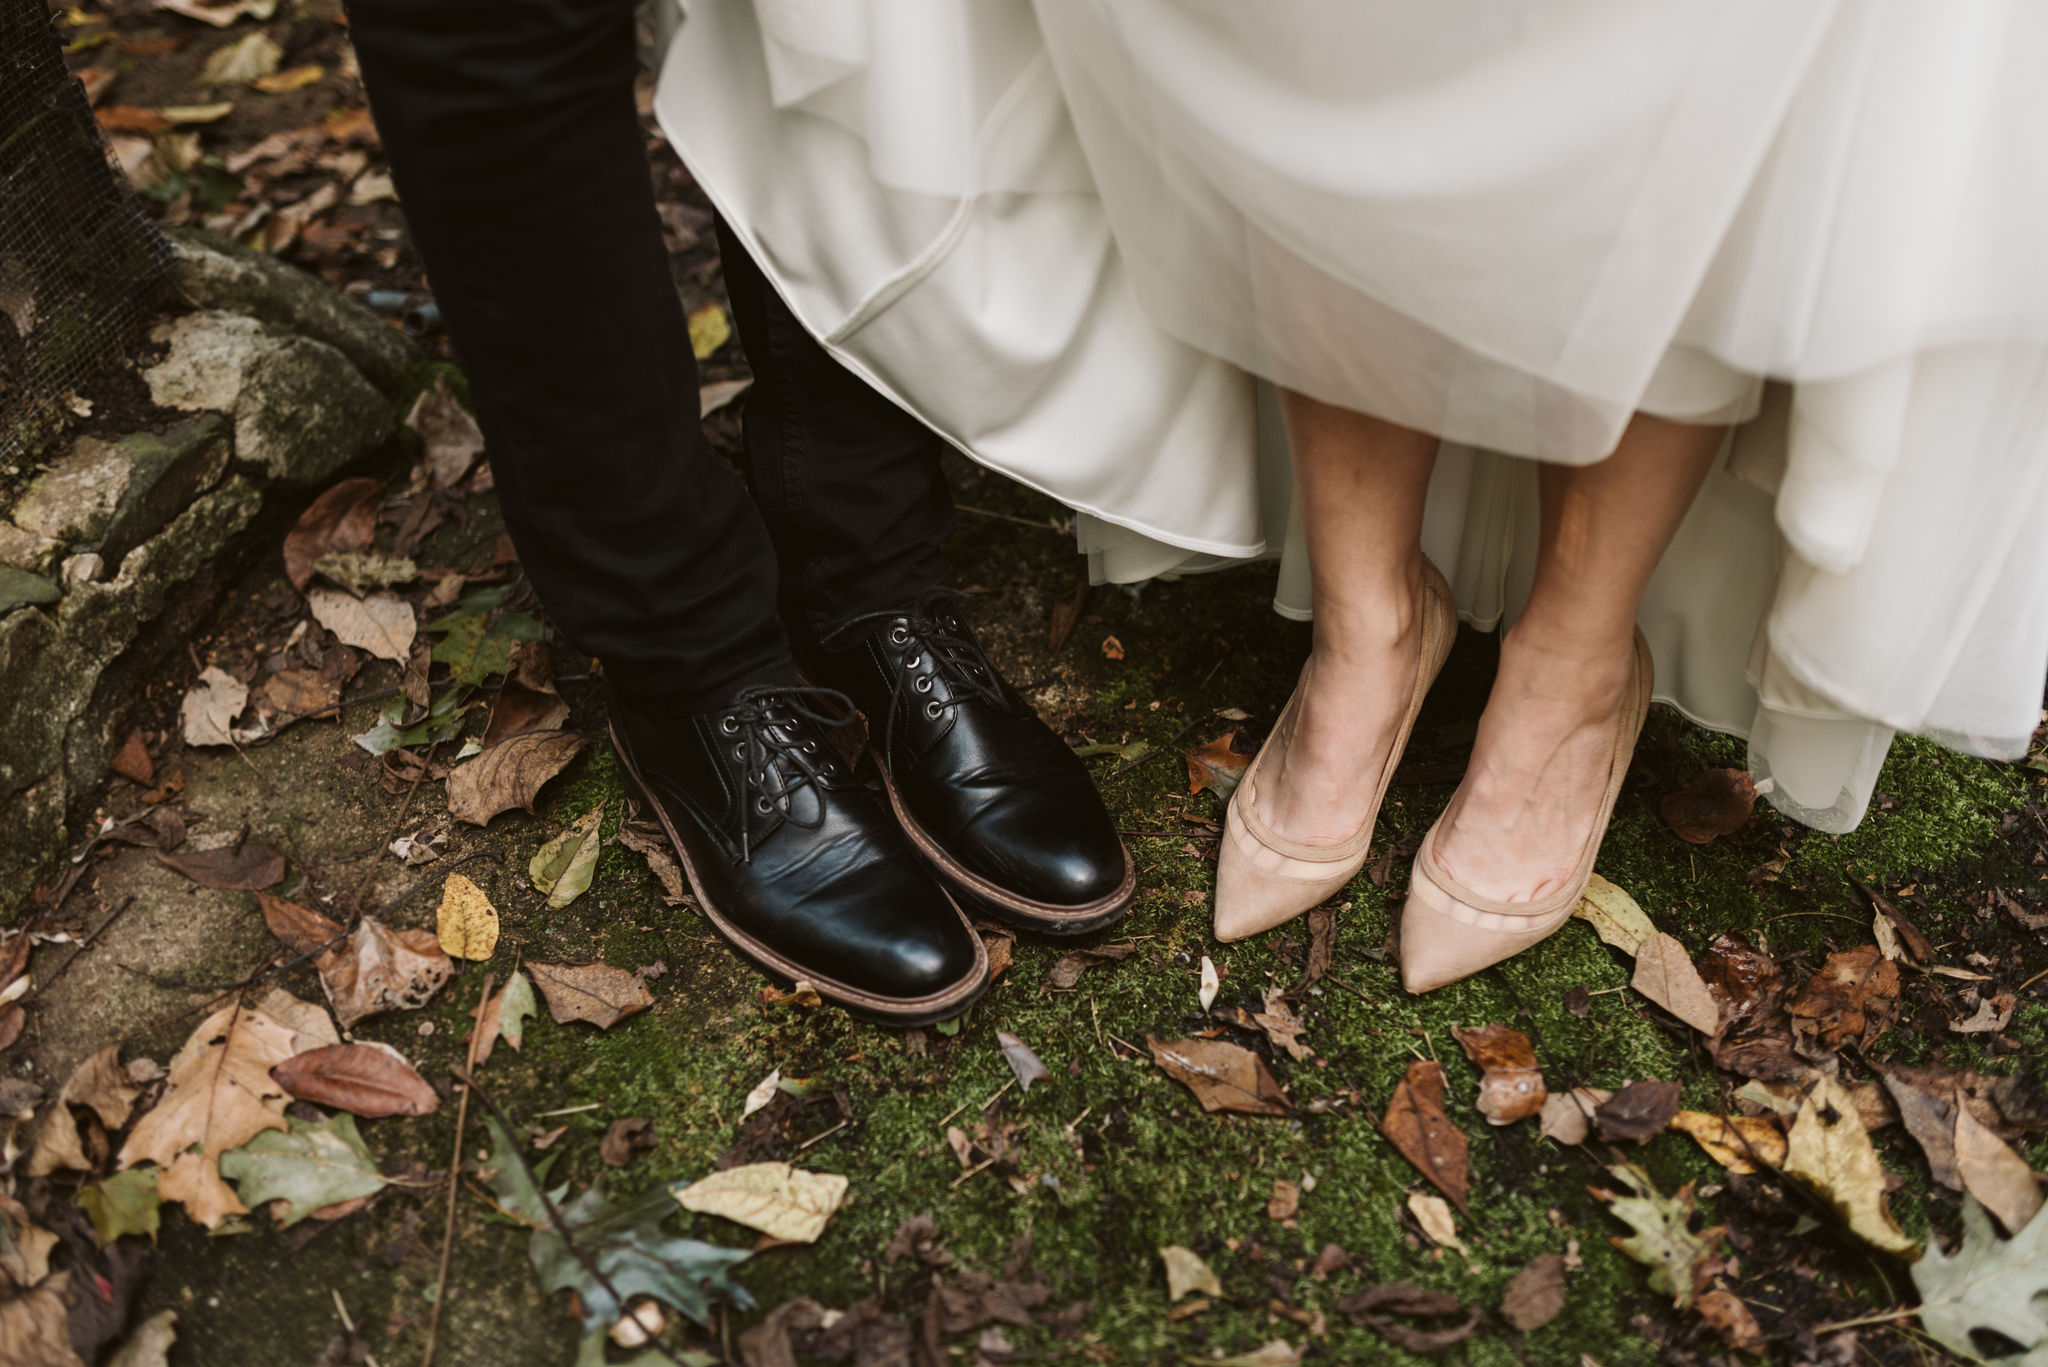  Baltimore, Maryland Wedding Photographer, The Mansion House at the Maryland Zoo, Relaxed, Romantic, Laid Back, Closeup on Bride and Groom’s Shoes, Beige Bridal Pumps, Black Dress Shoes 